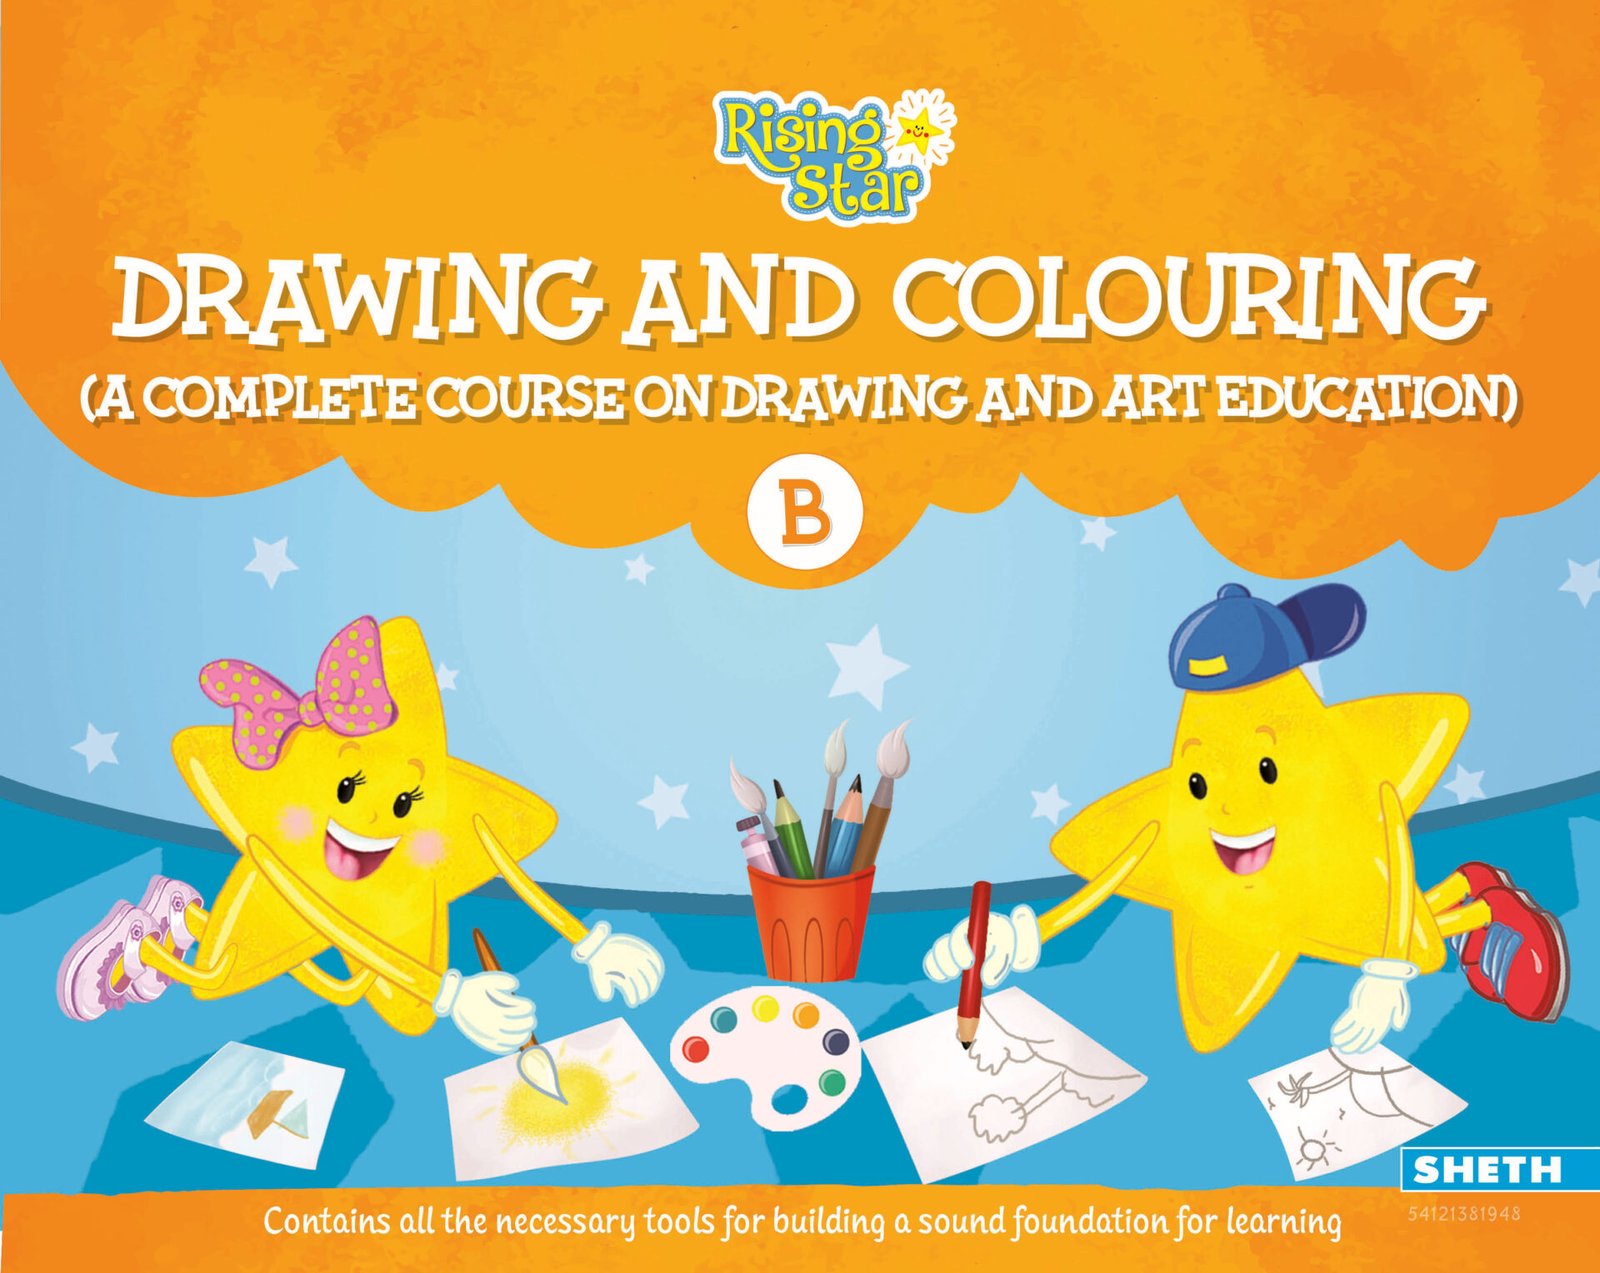 Rising Star Drawing & Colouring - B - Shethbooks | Official Buy Page of